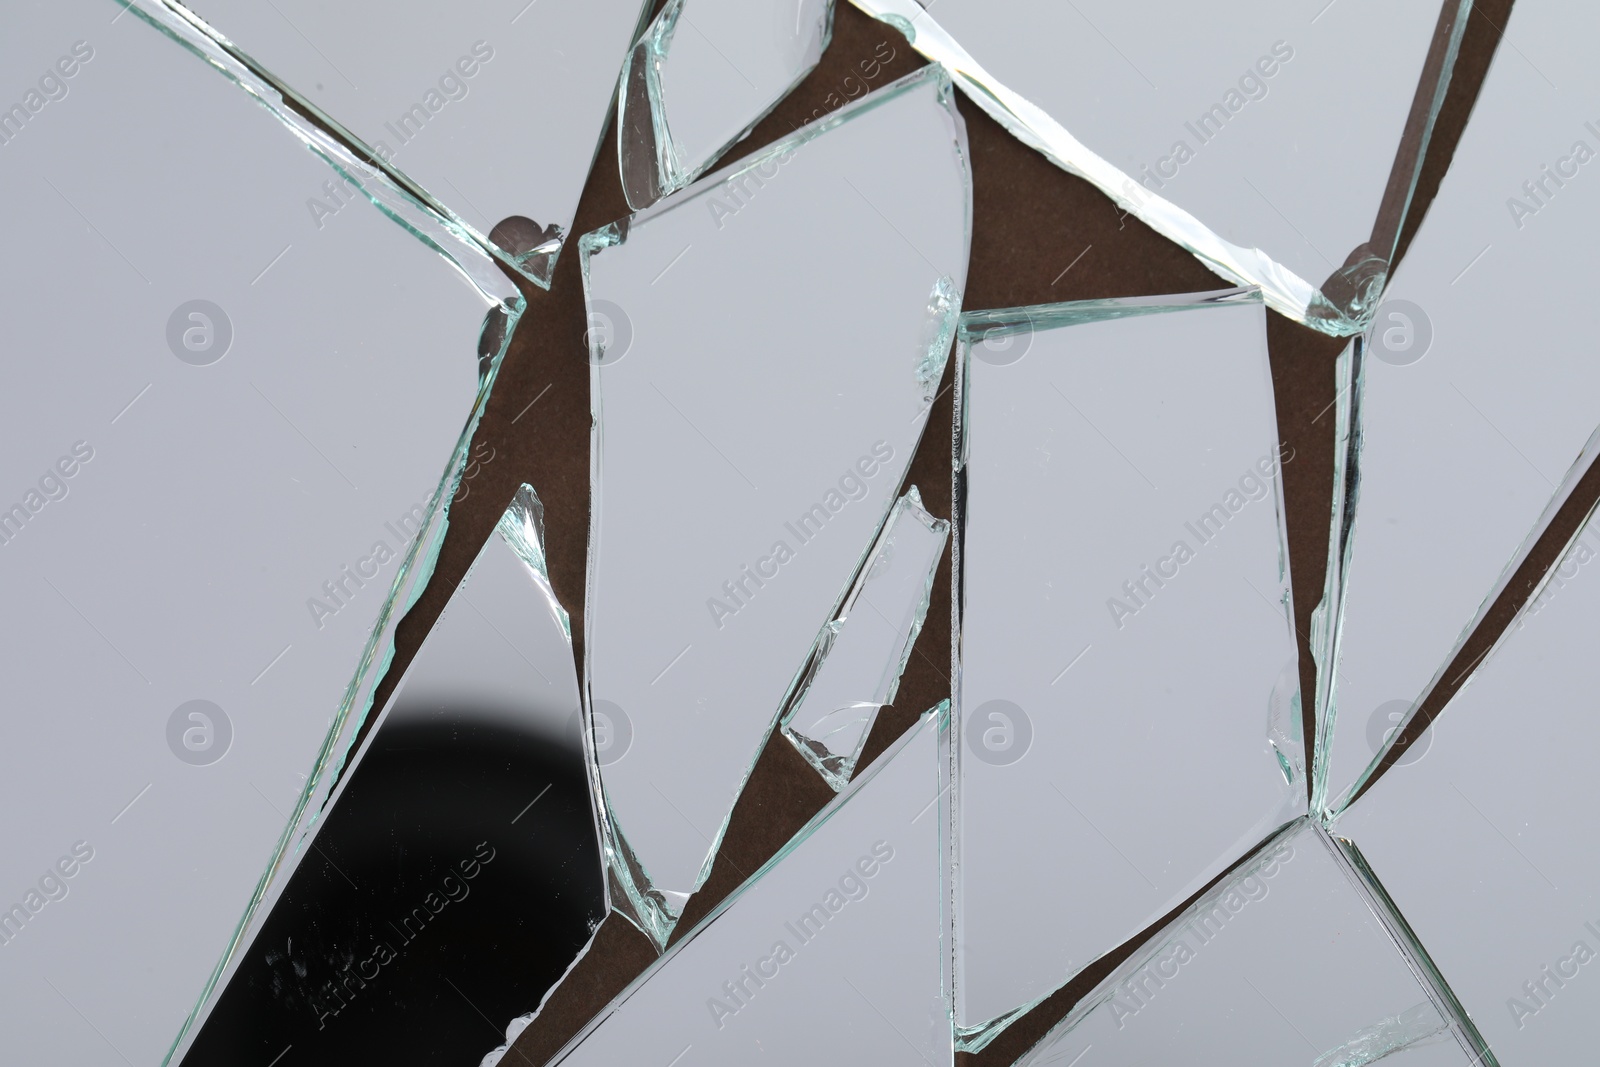 Photo of Shards of broken mirror on backing board, top view